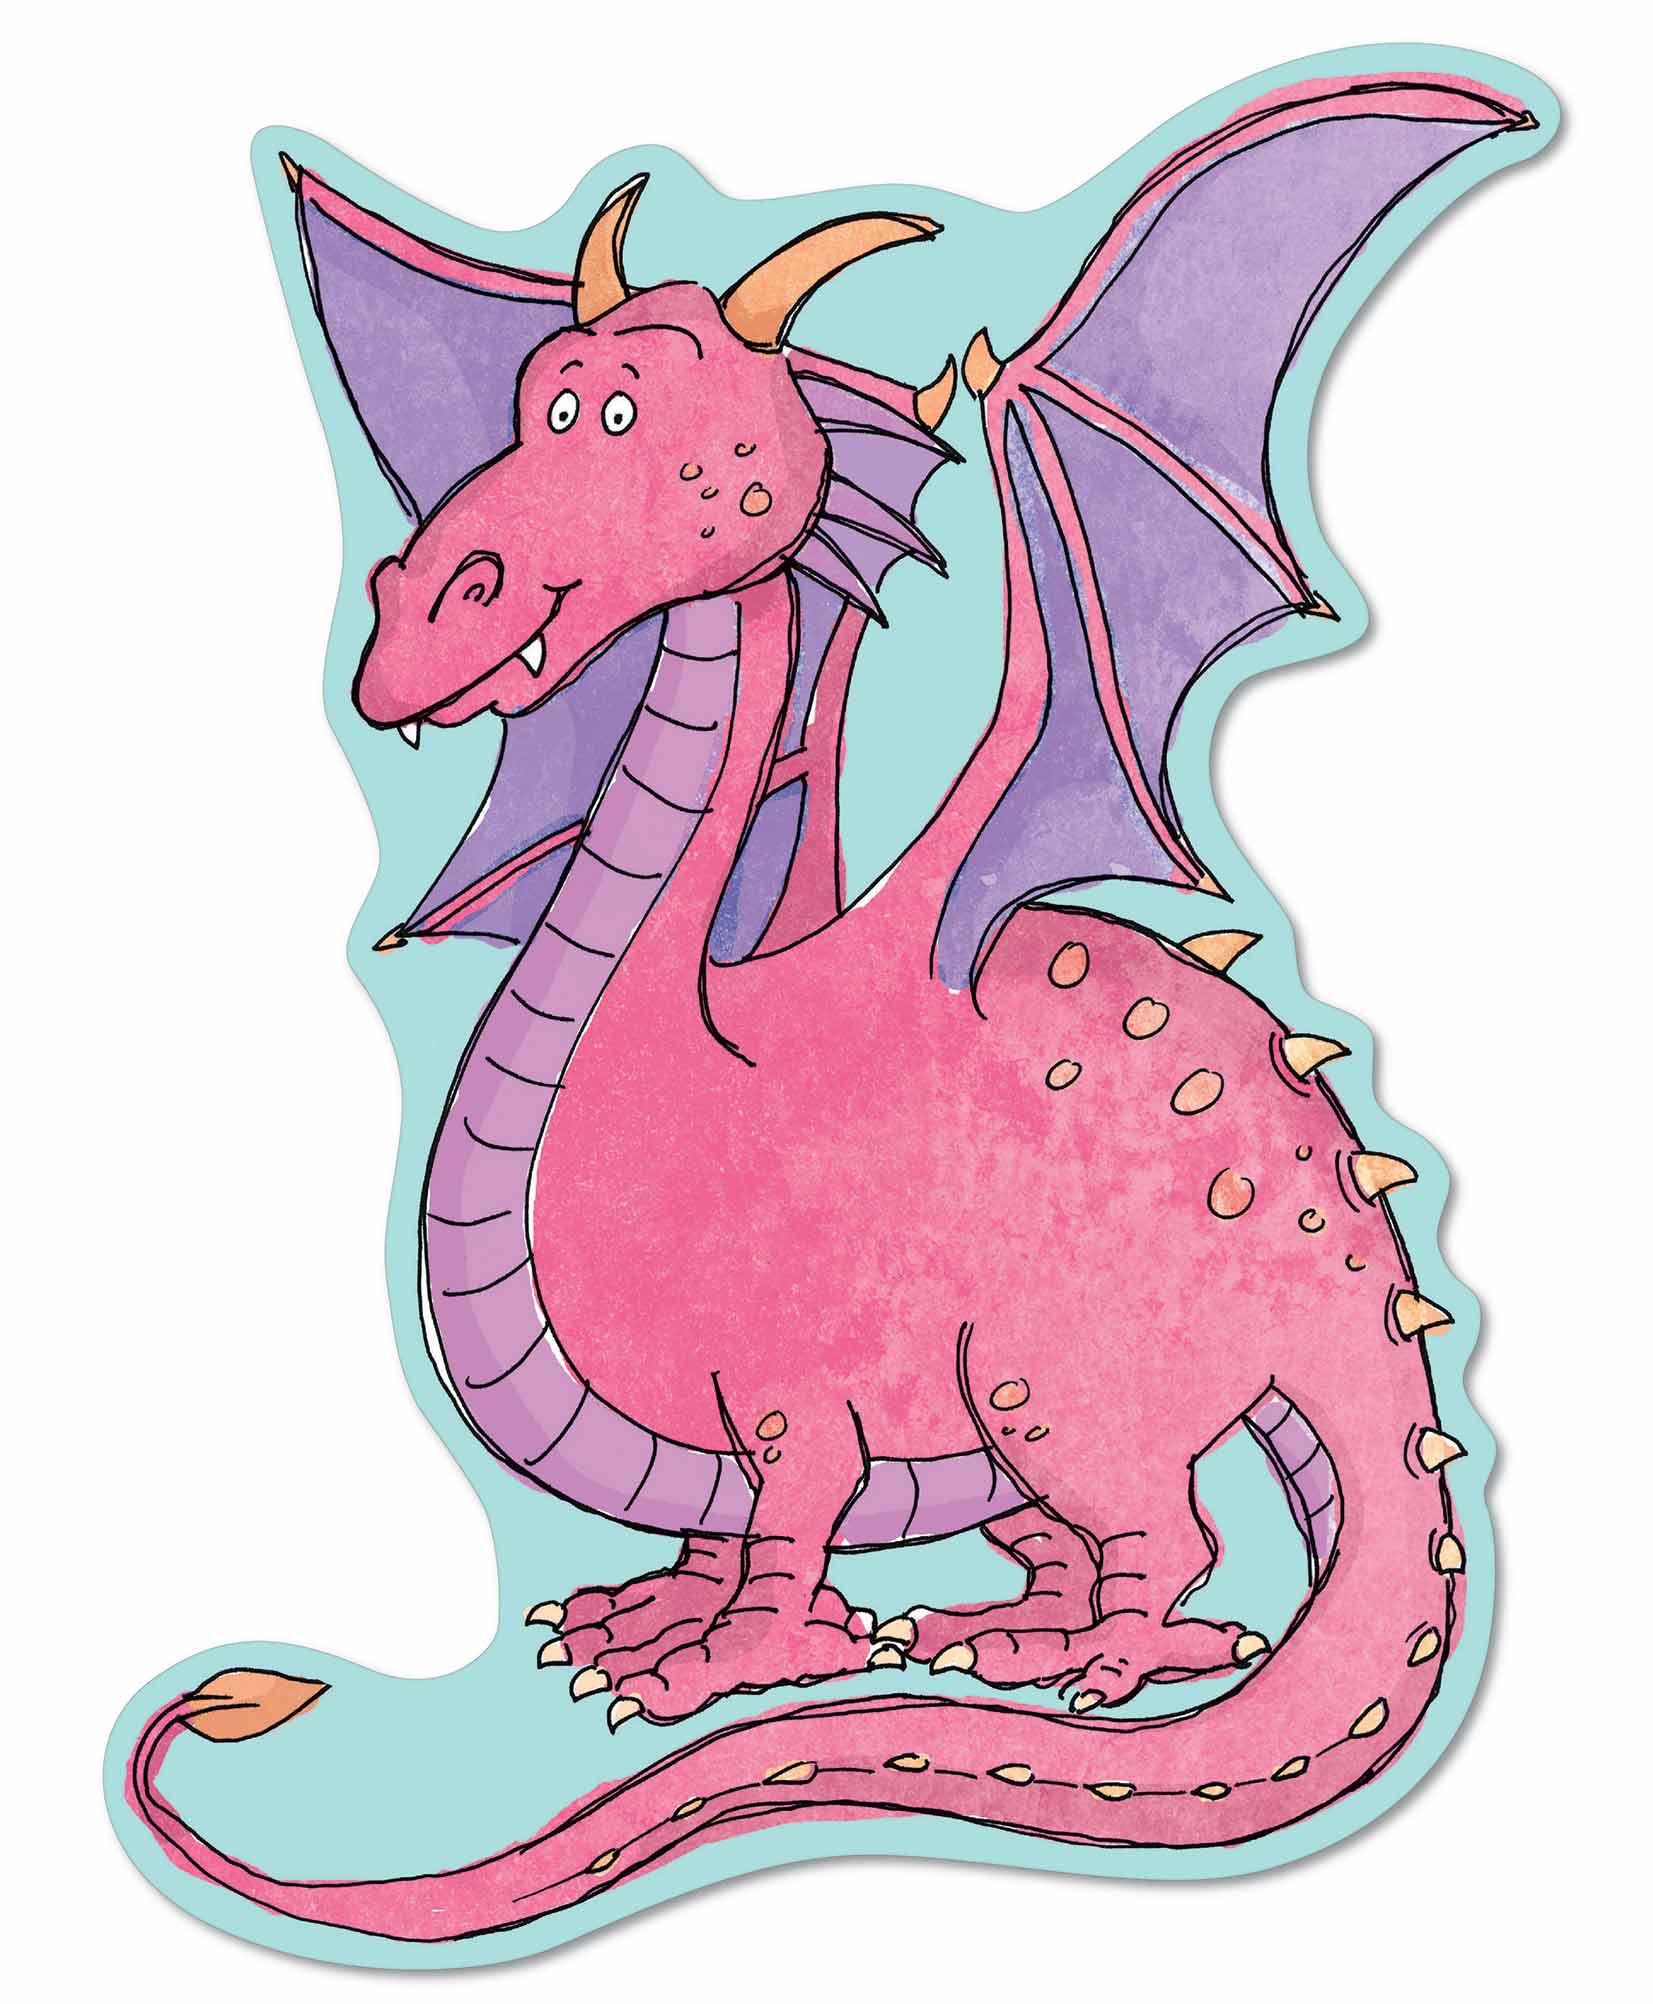 Fairytale Characters - The Dragon